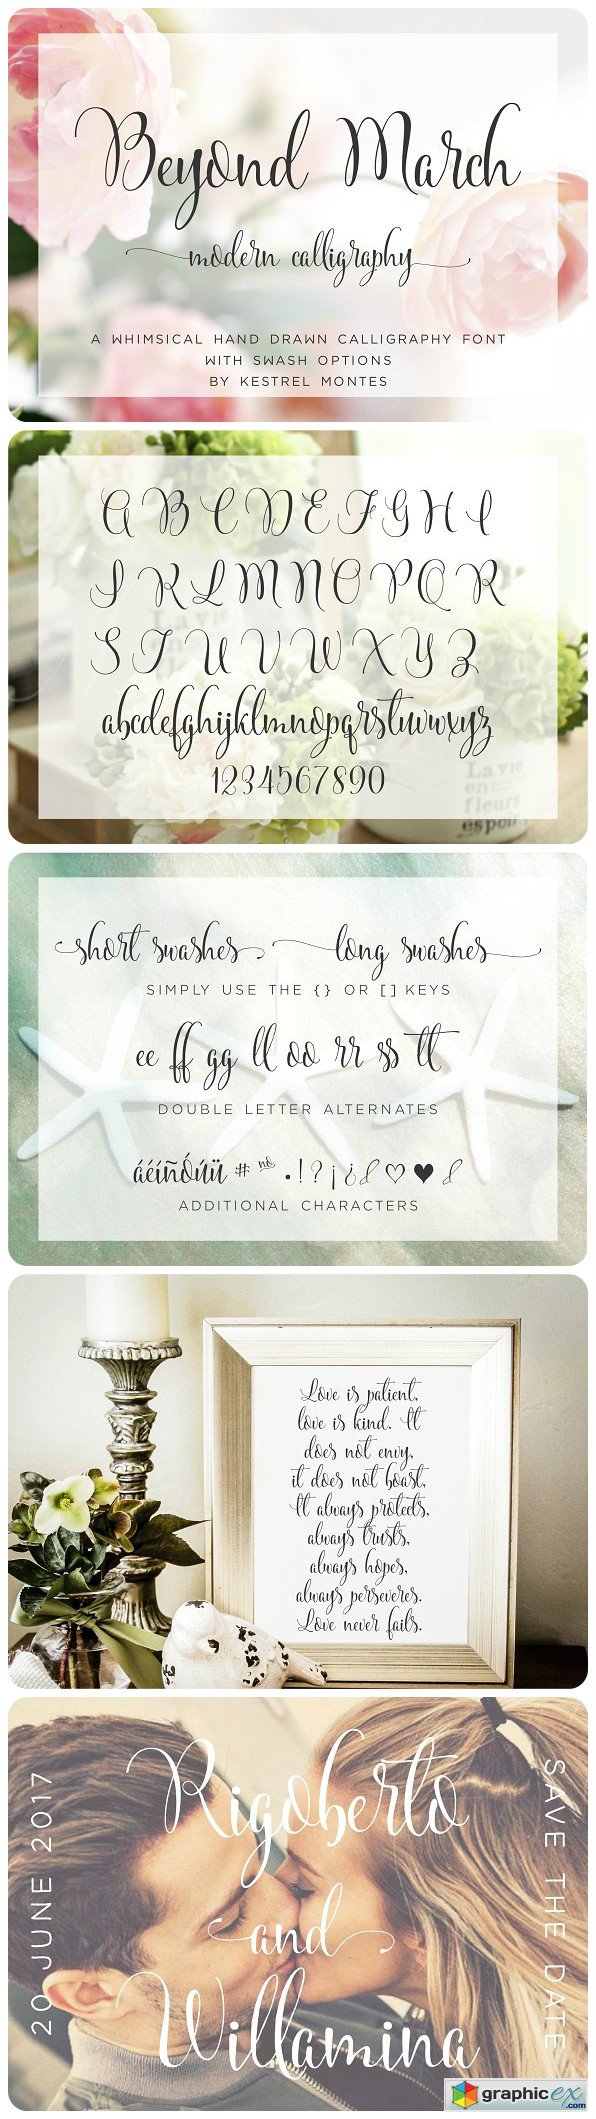 Beyond March calligraphy font